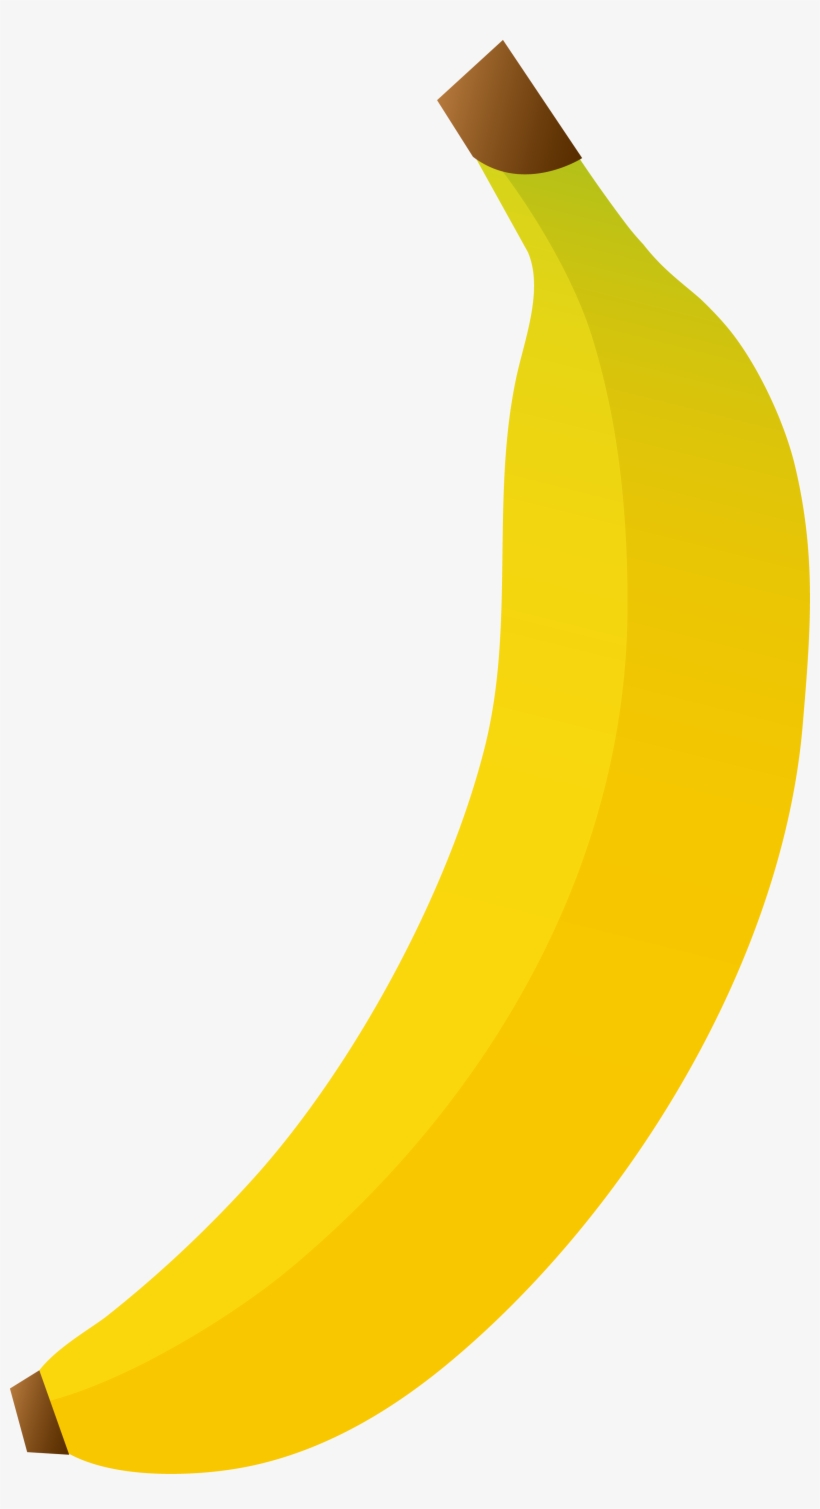 Download This Banana Png Image Today, Hassle Free - Banana Clipart, transparent png #169902